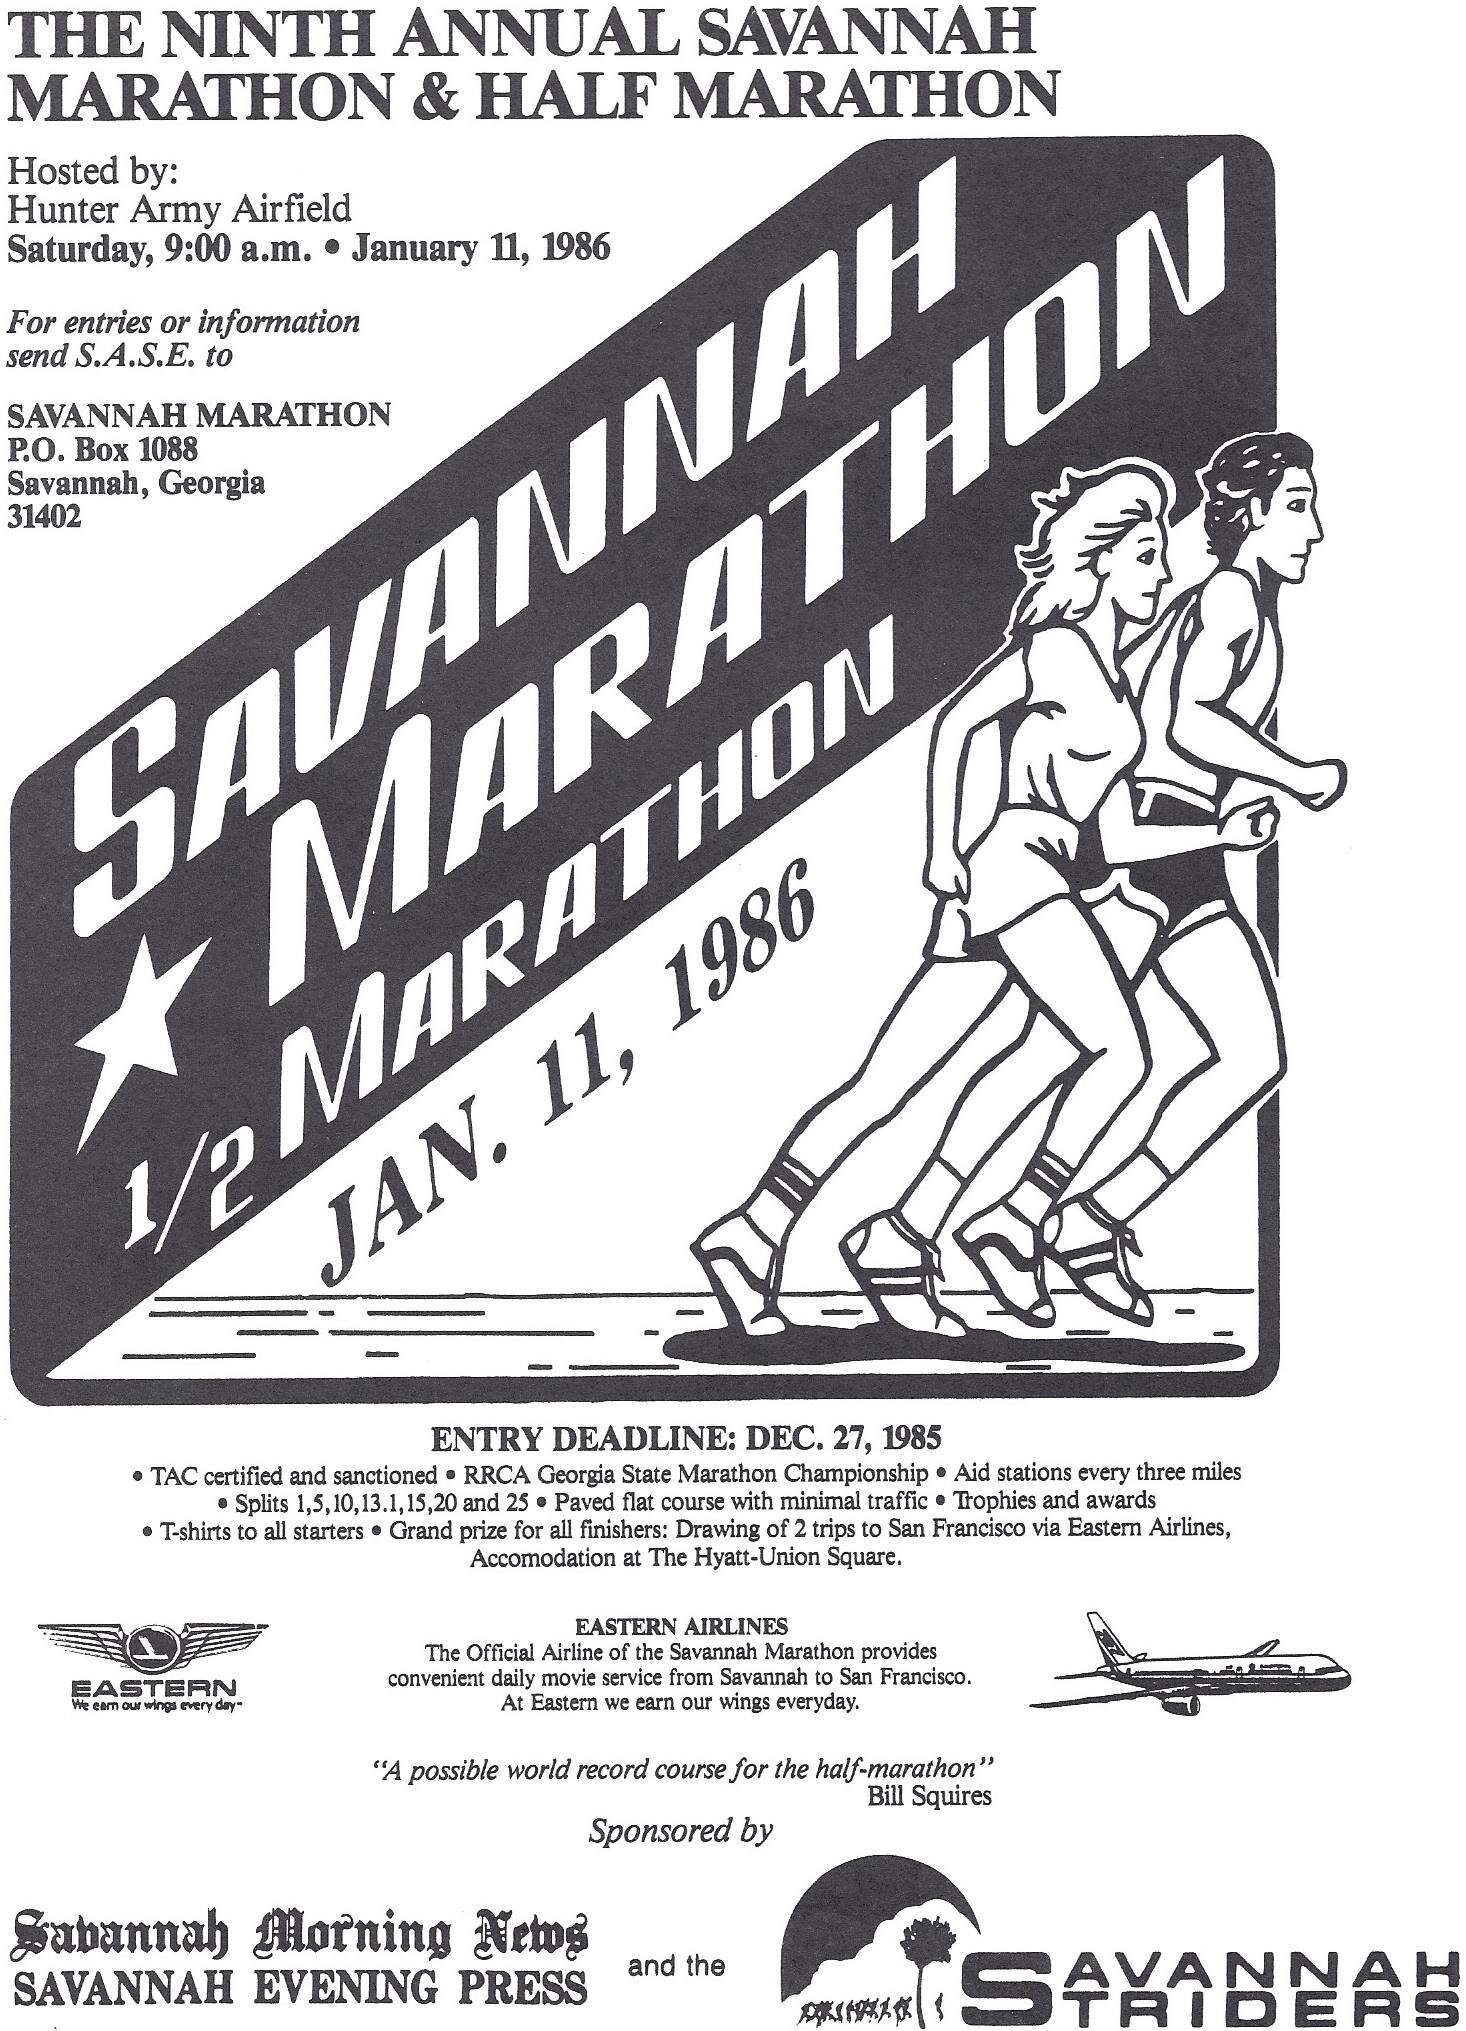 Event Poster from 1986